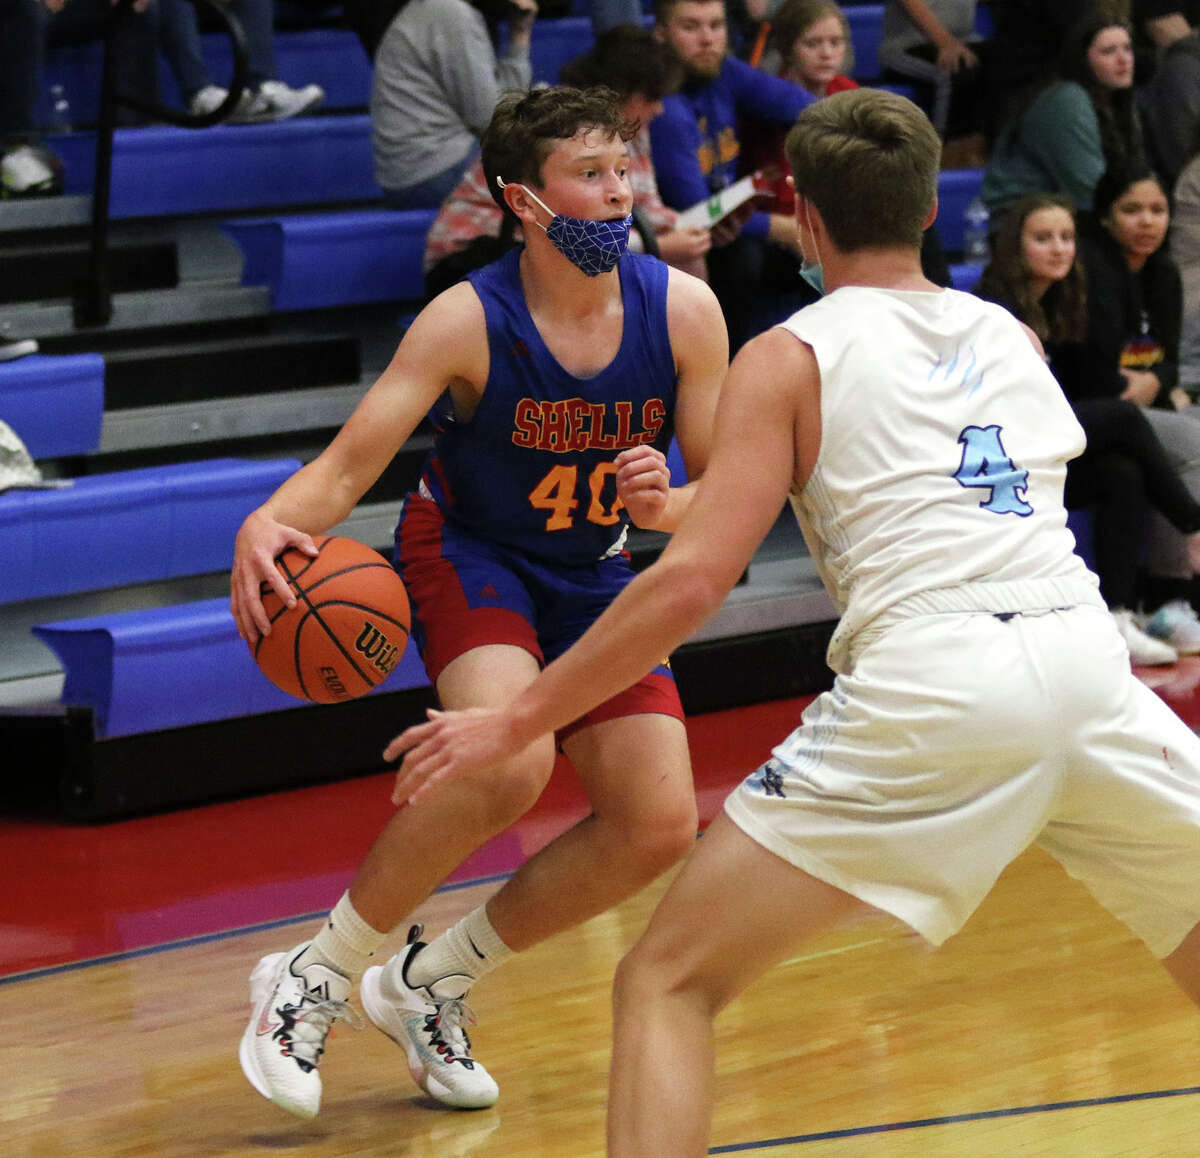 Roxana's Aidan Briggs (left) scored 20 points, including five 3-point baskets, Tuesday against Greenville at the Duster Thomas Hoops classic in Pinckneyville